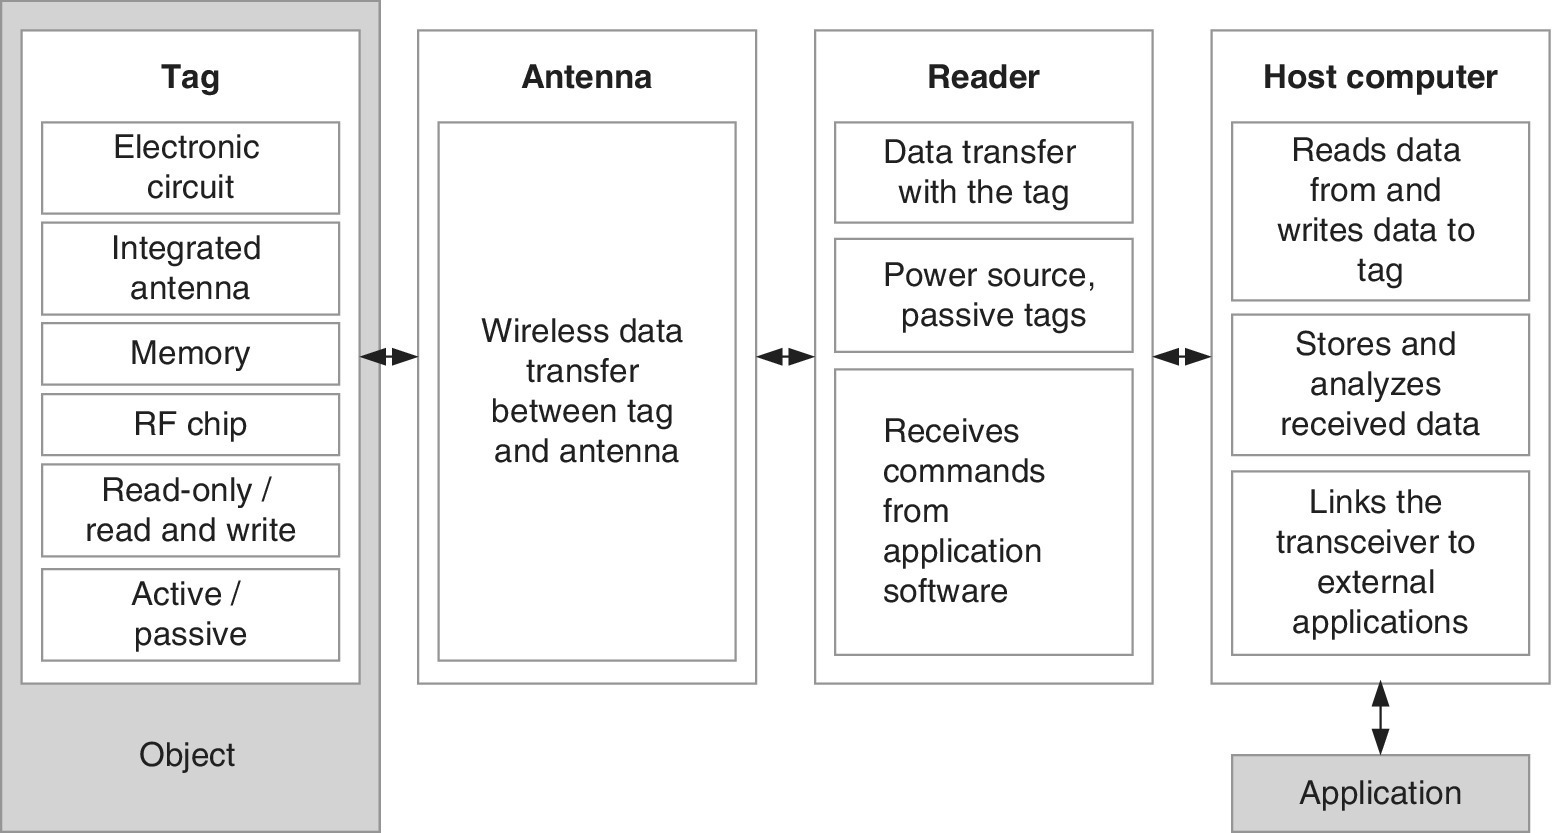 Schematic of the RFID system architecture illustrating the RFID tag attached to the object, antenna, reader, and host computer, and connected to an application.